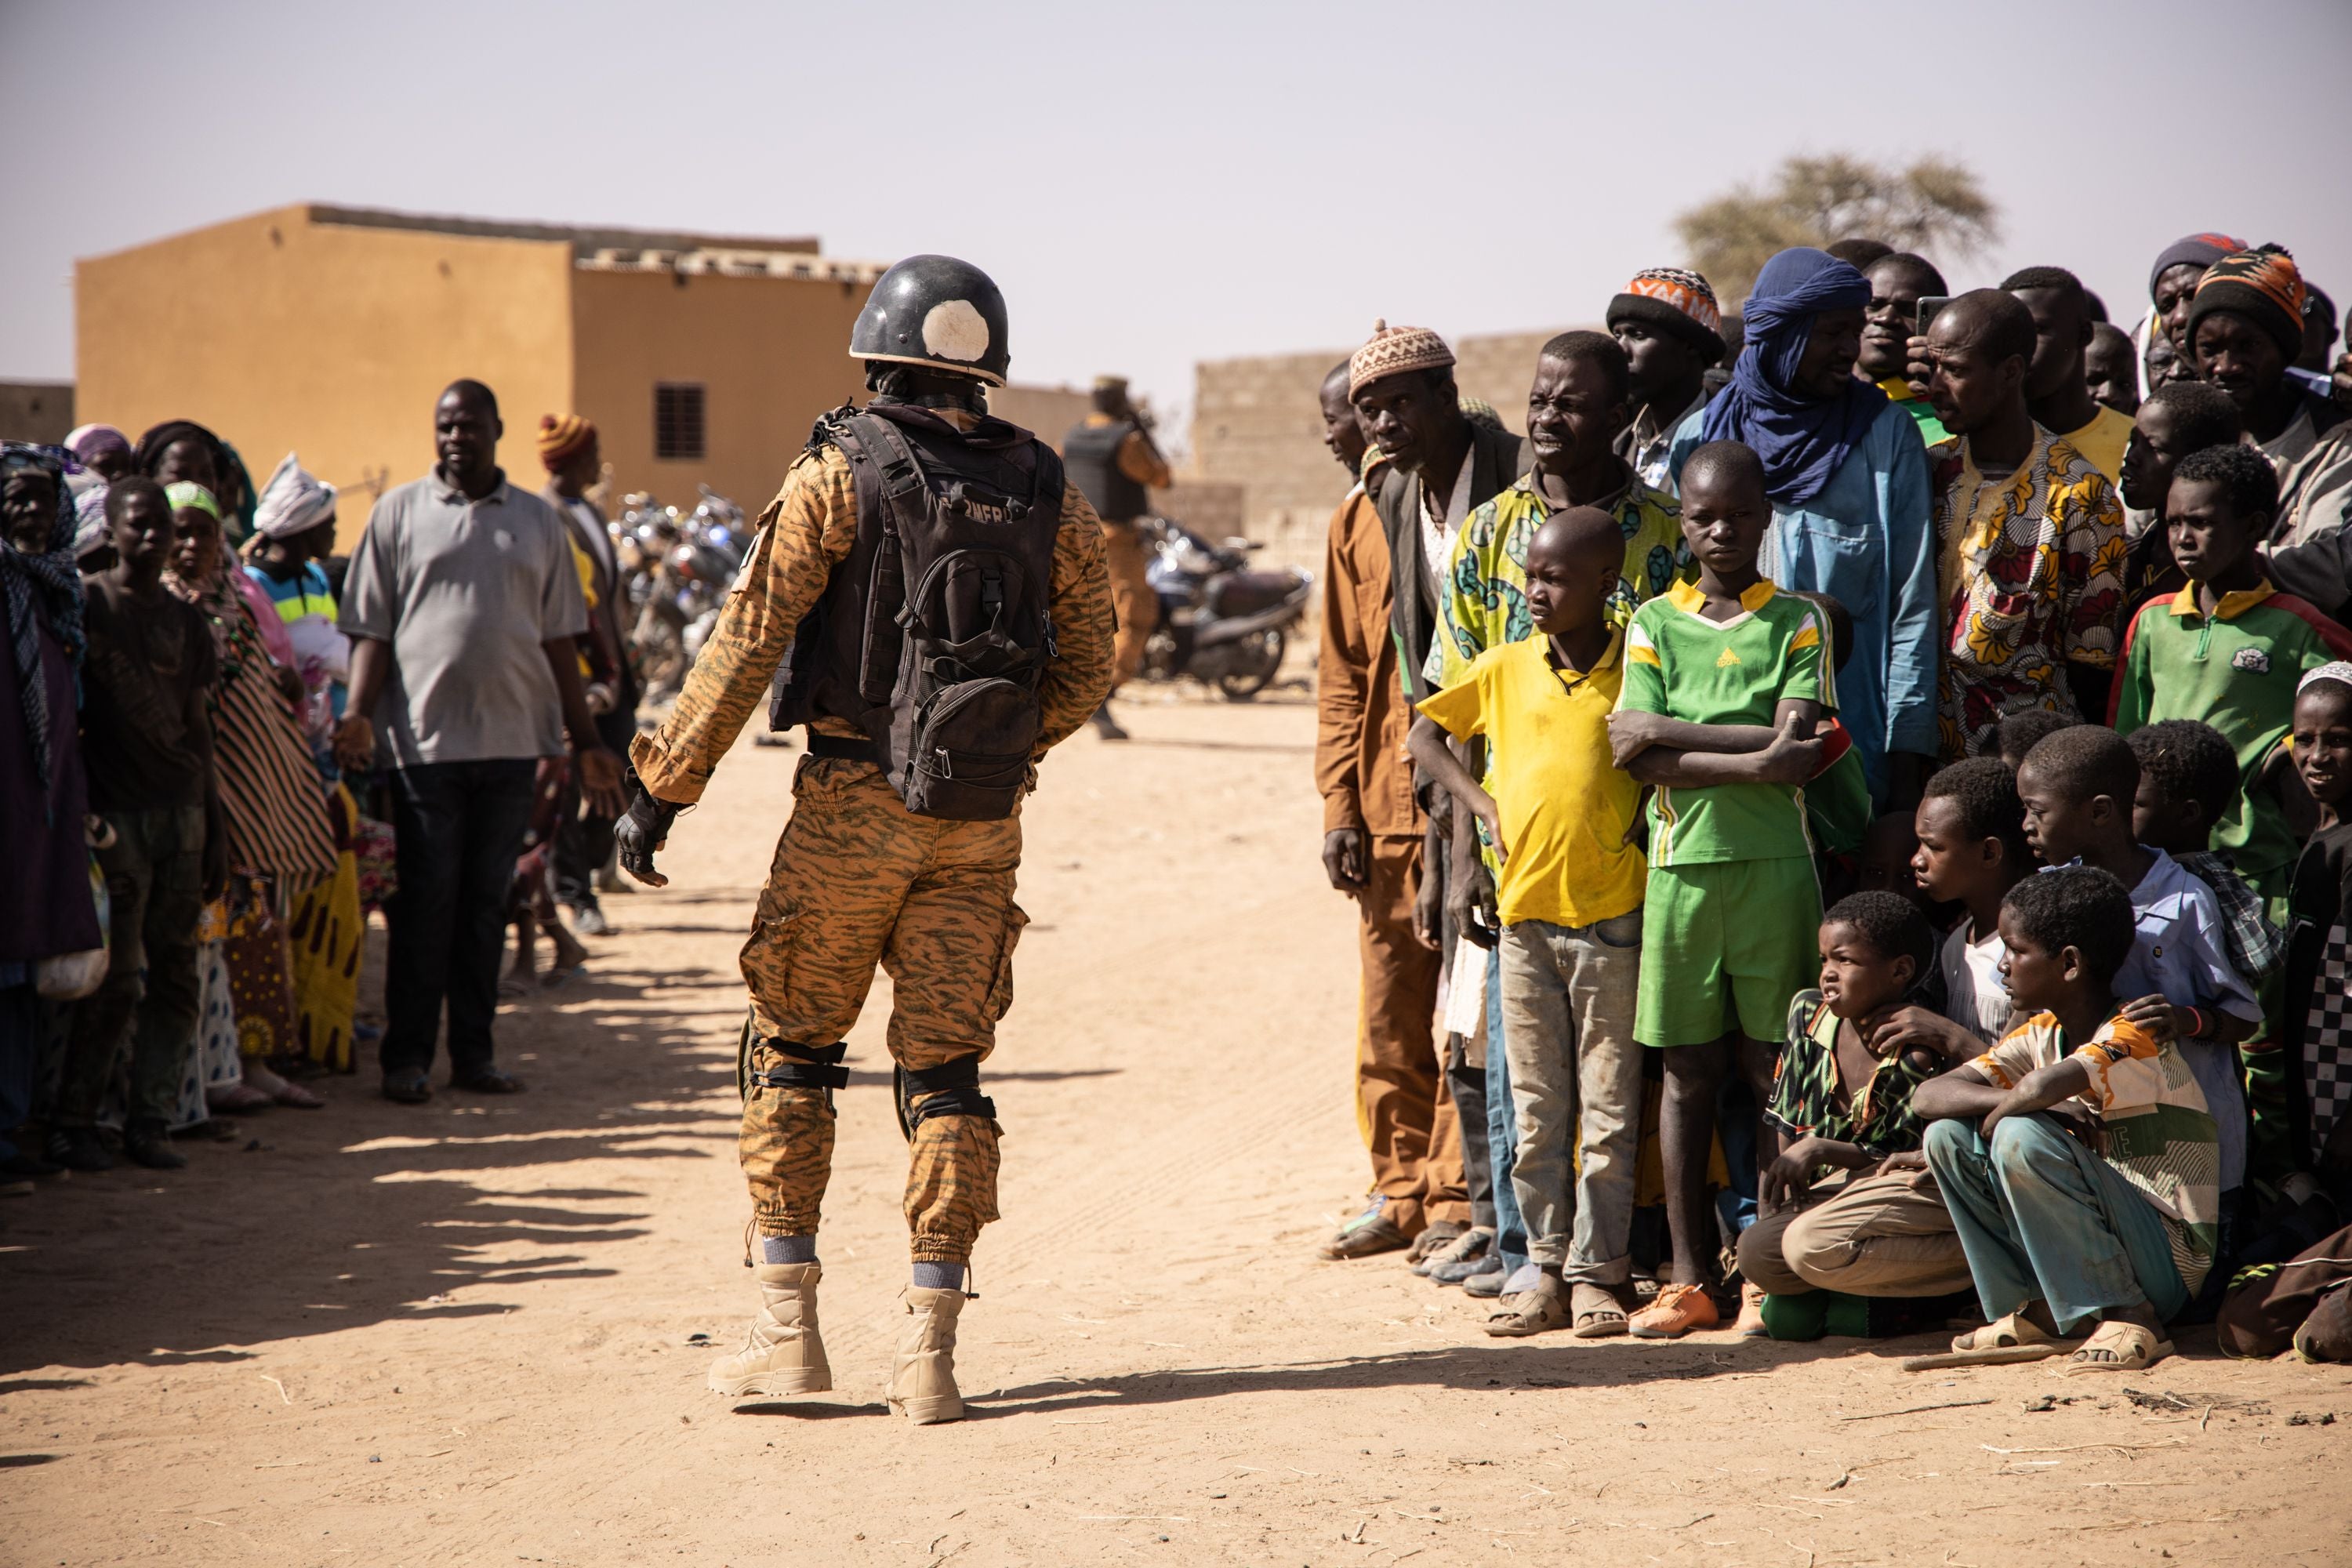 A government soldier walks past a group of villagers displaced by fighting in Burkina Faso’s northern Sahel region, February 3, 2020. 